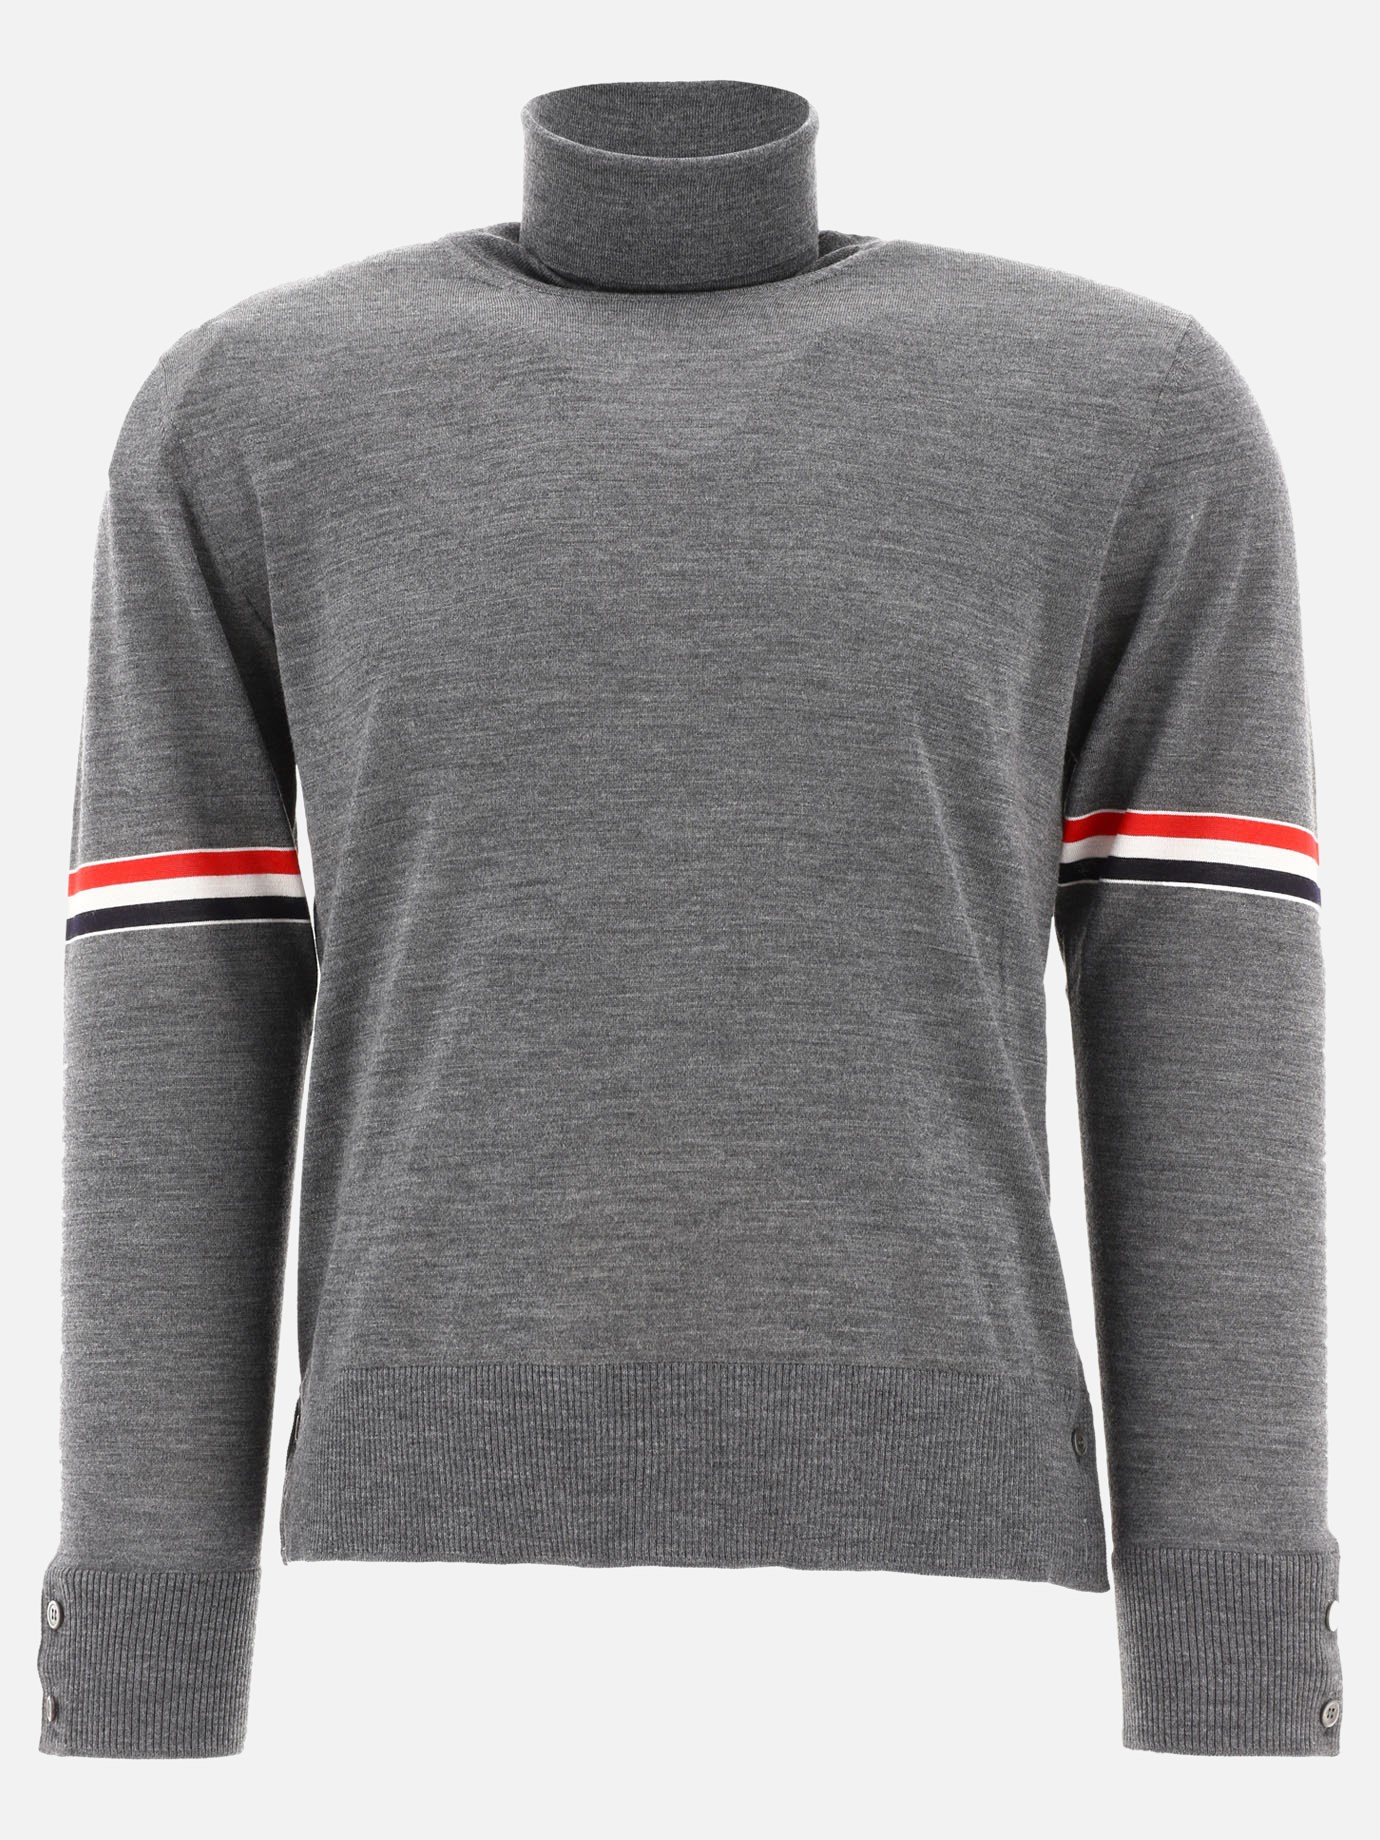  Armbands  sweaterby Thom Browne - 1